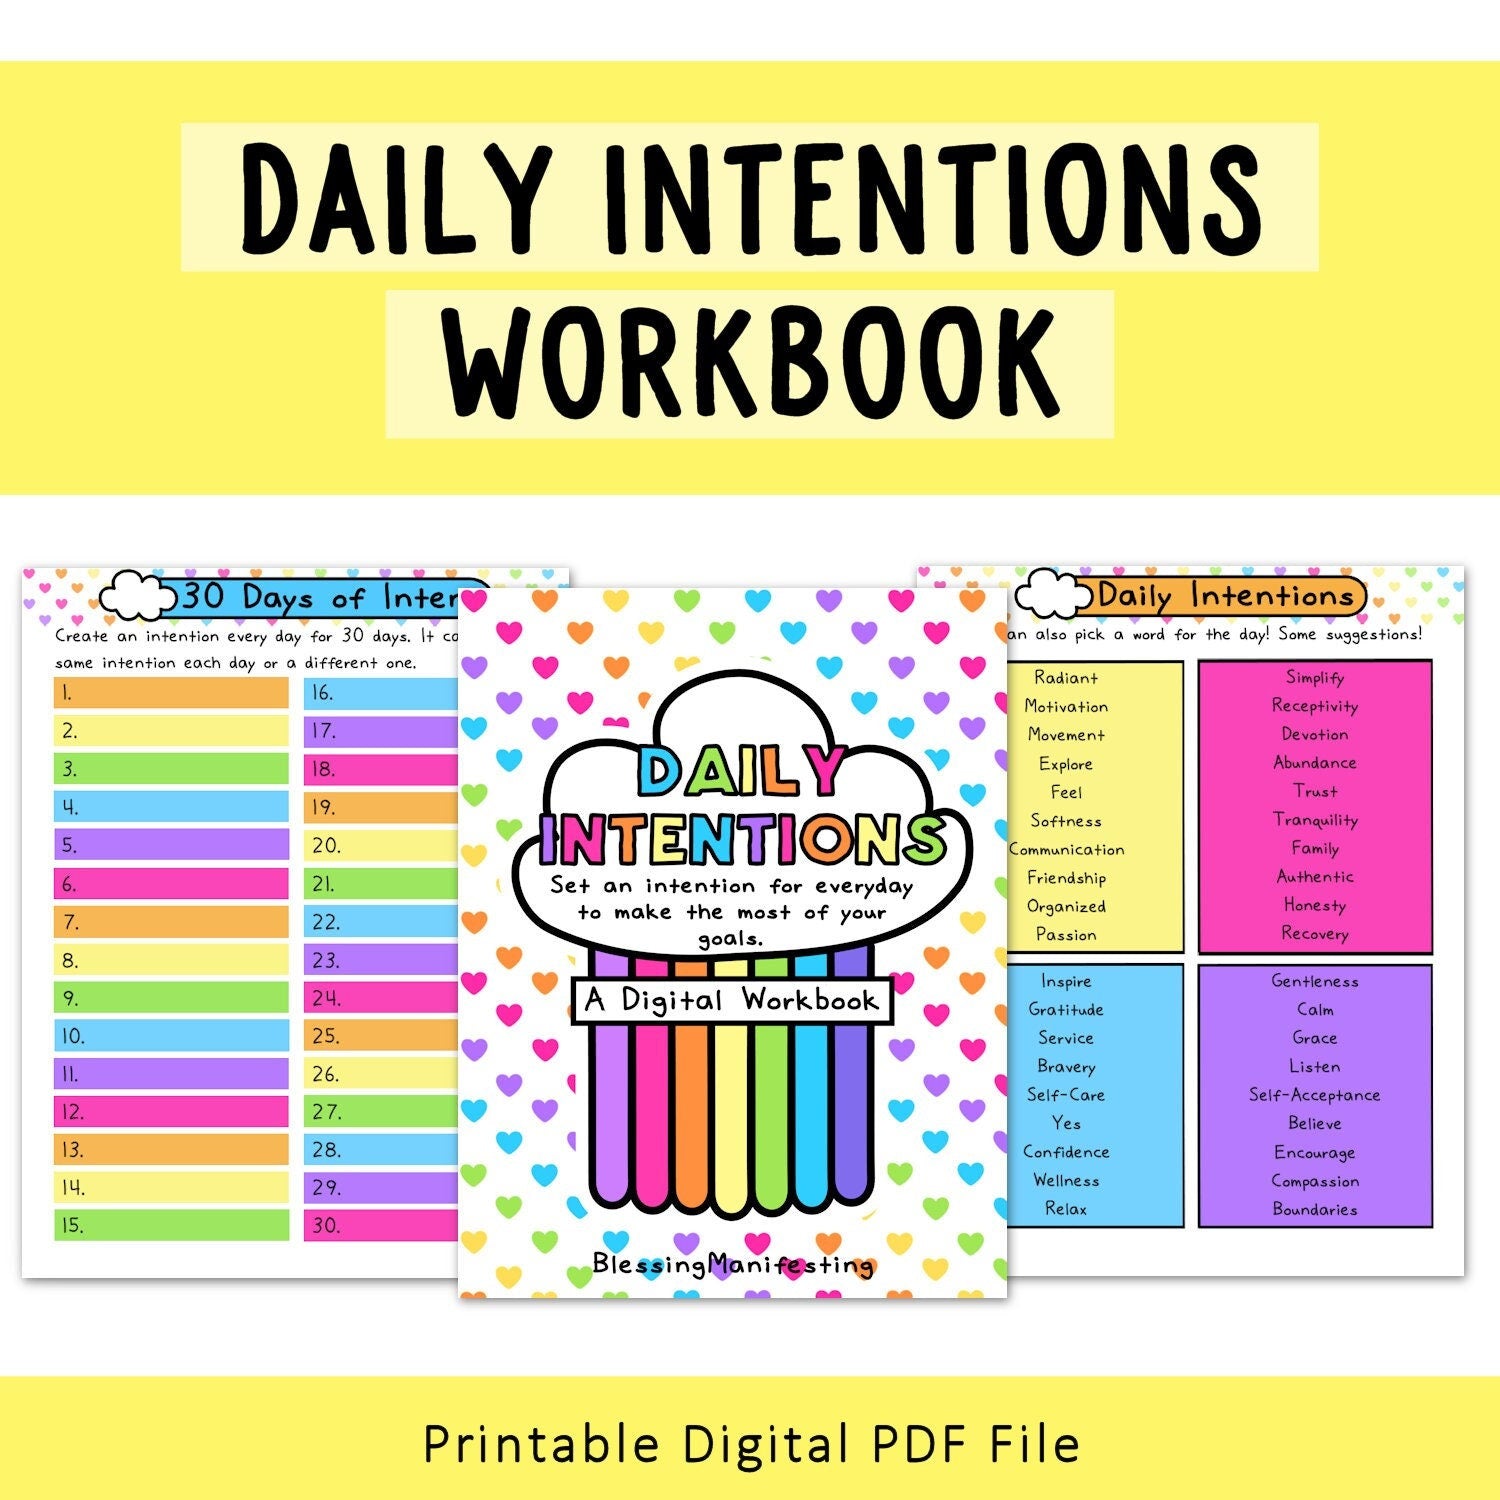 Daily Intentions Workbook